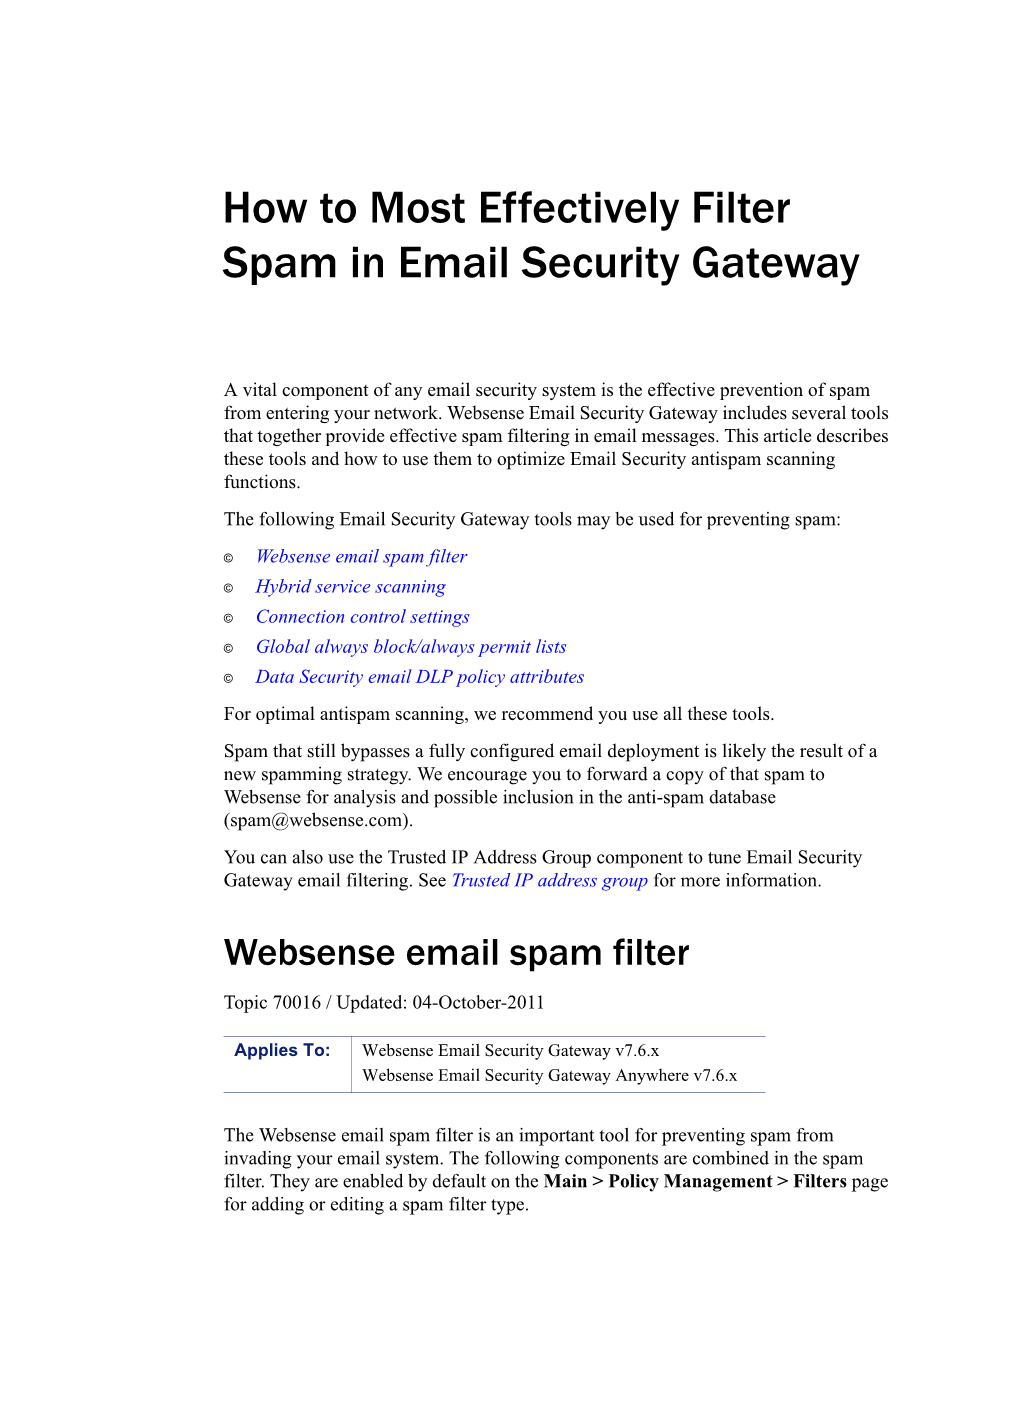 How to Most Effectively Filter Spam in Email Security Gateway